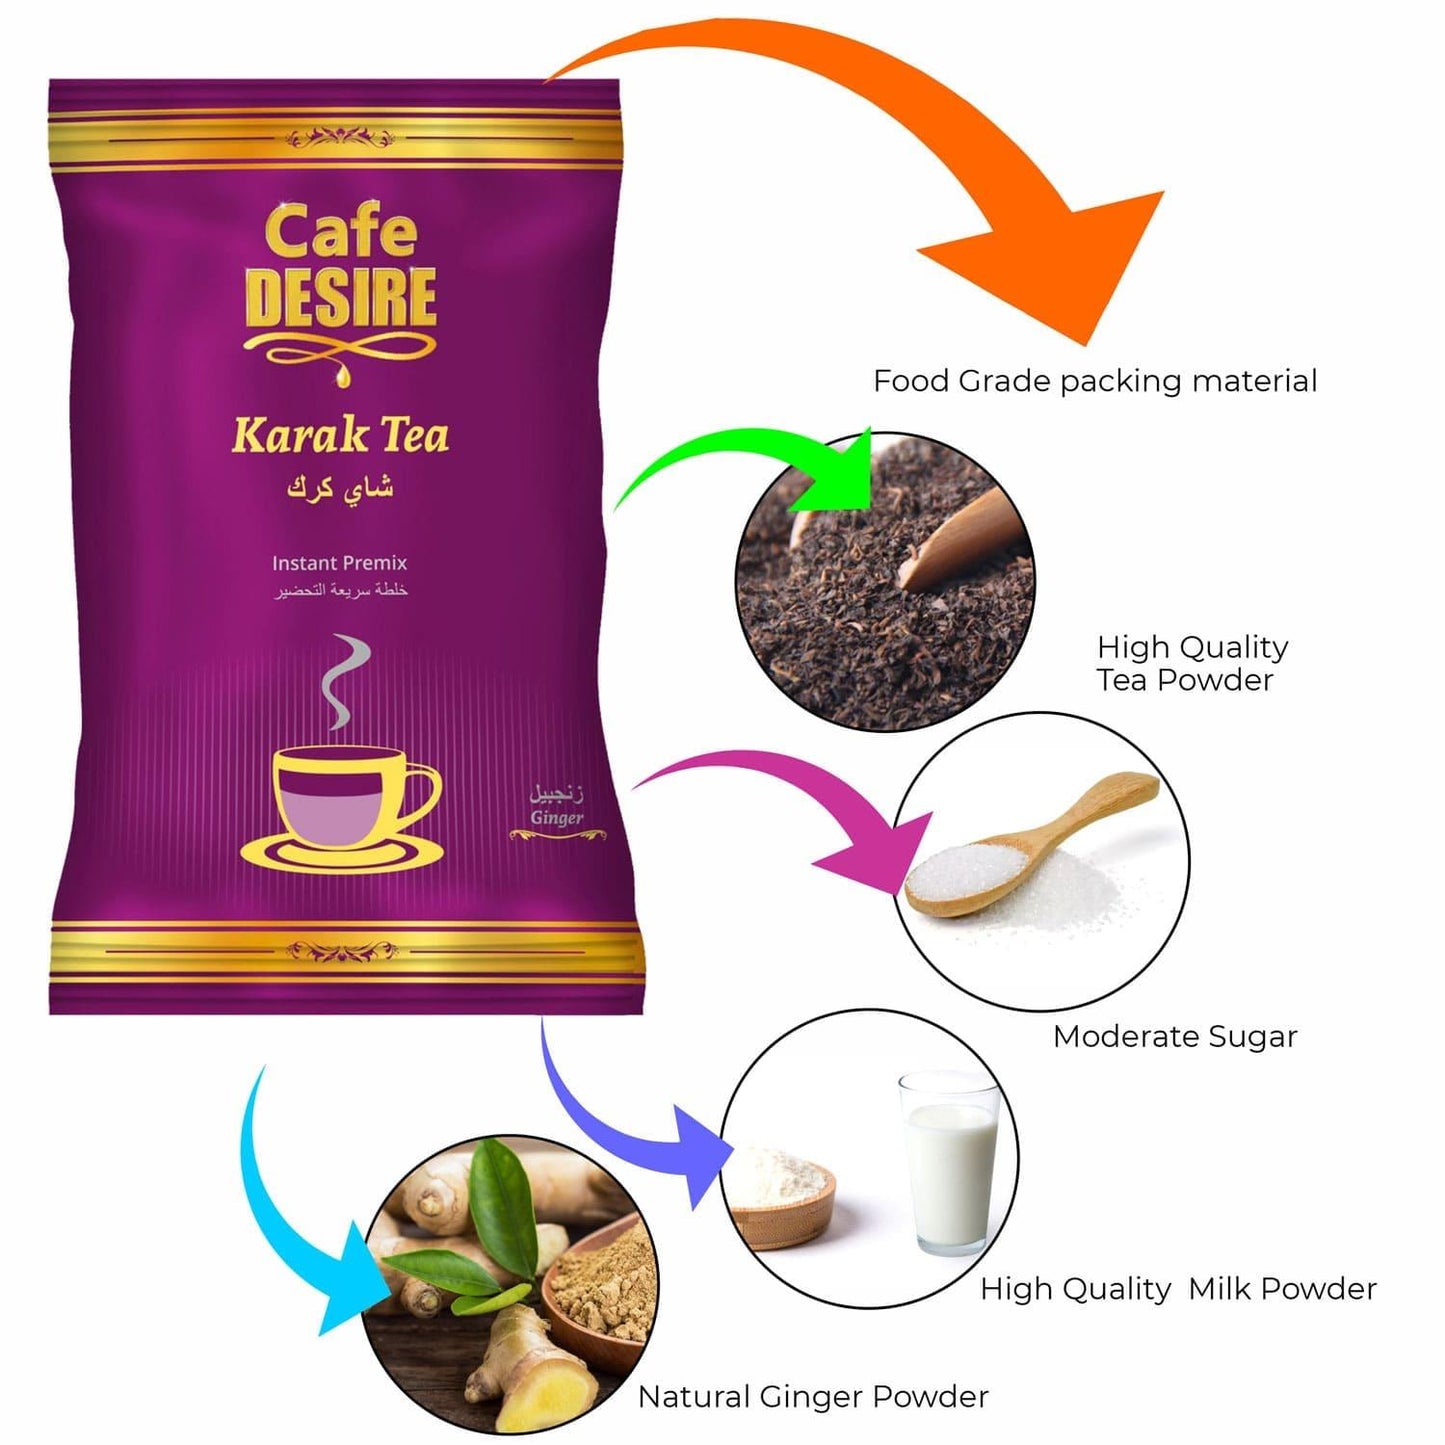 Karak Ginger Tea Premix (1Kg) | 3 in 1 Tea | Makes 40 Cups(8 oz) | Strong Tea with Ginger Flavour | Milk not required | Rich taste as Home-made | For Manual Use - Just add Hot Water | Suitable for all Vending Machines - cd-usa.com